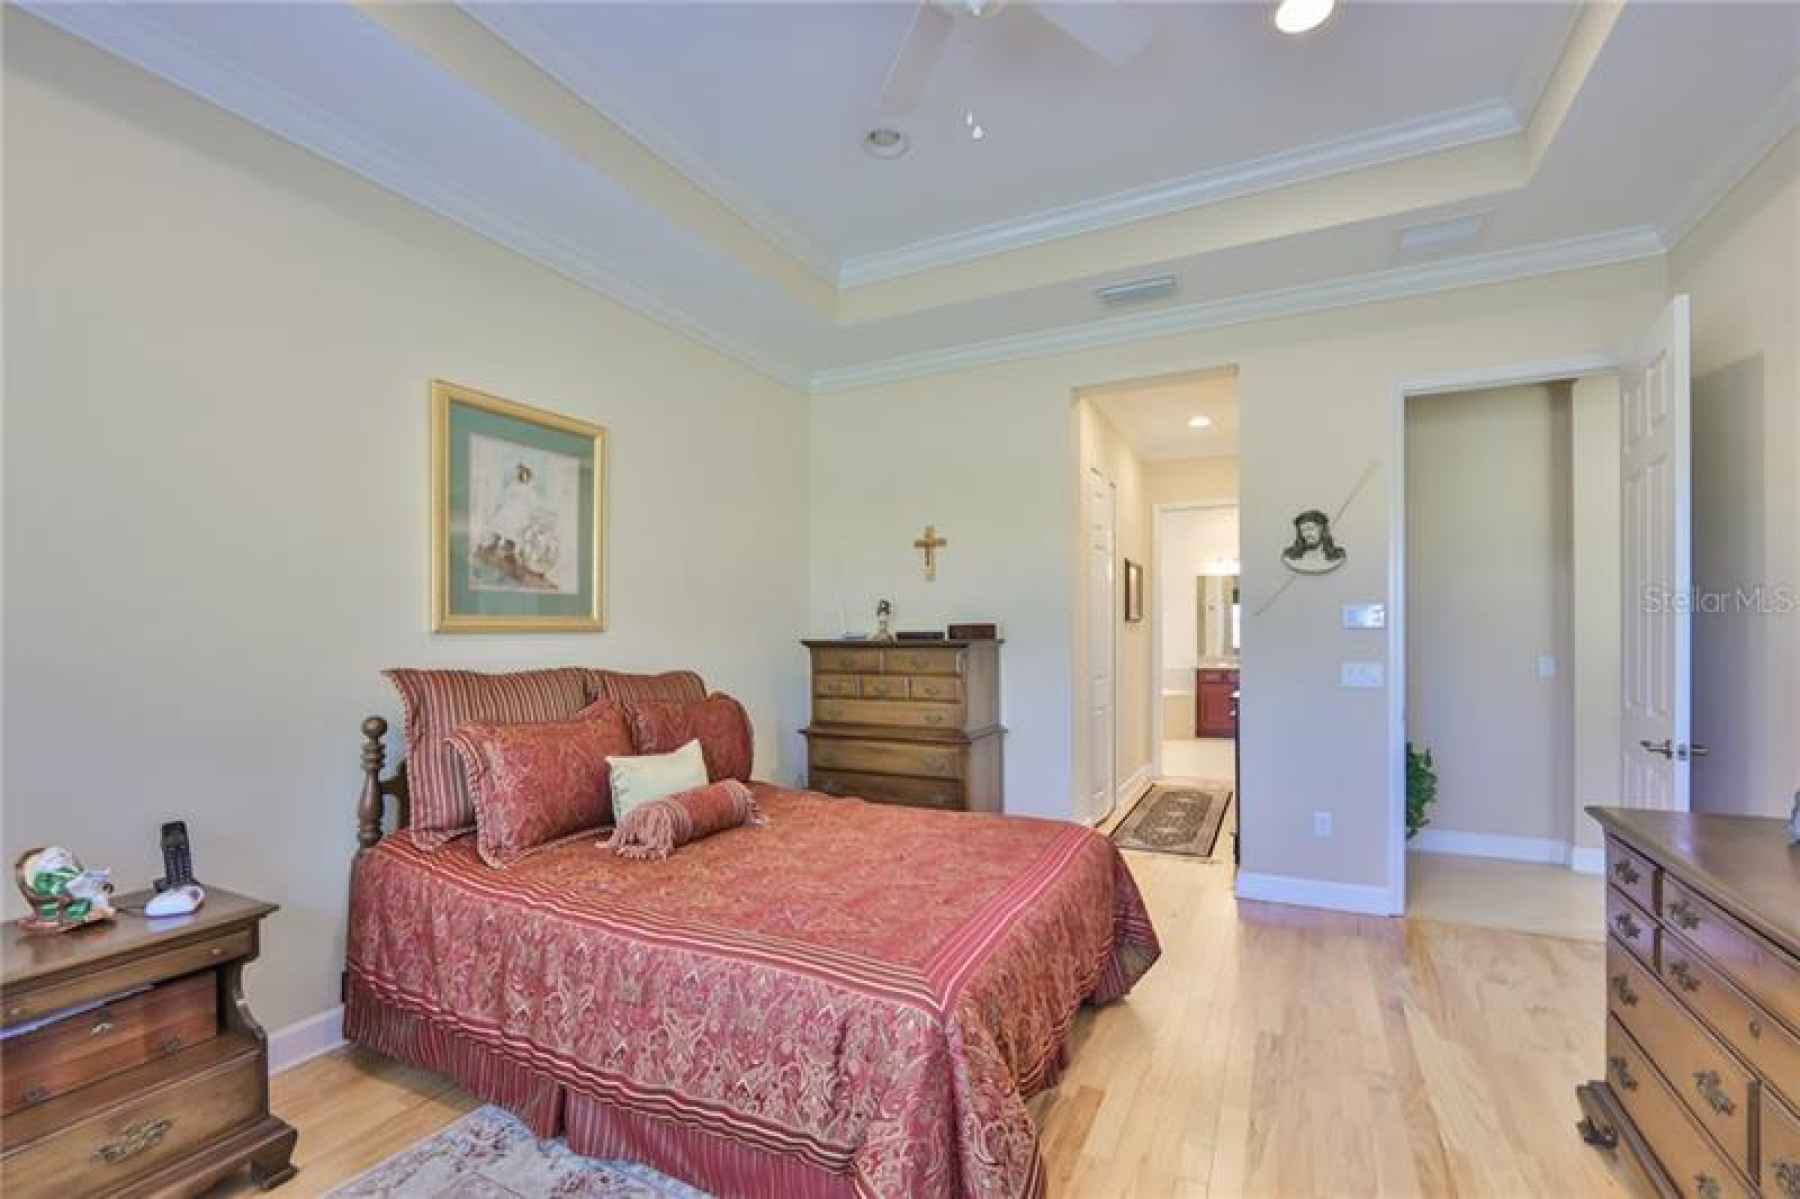 Master bedroom has two large custom walk-in closets and a master bath, en-suite.